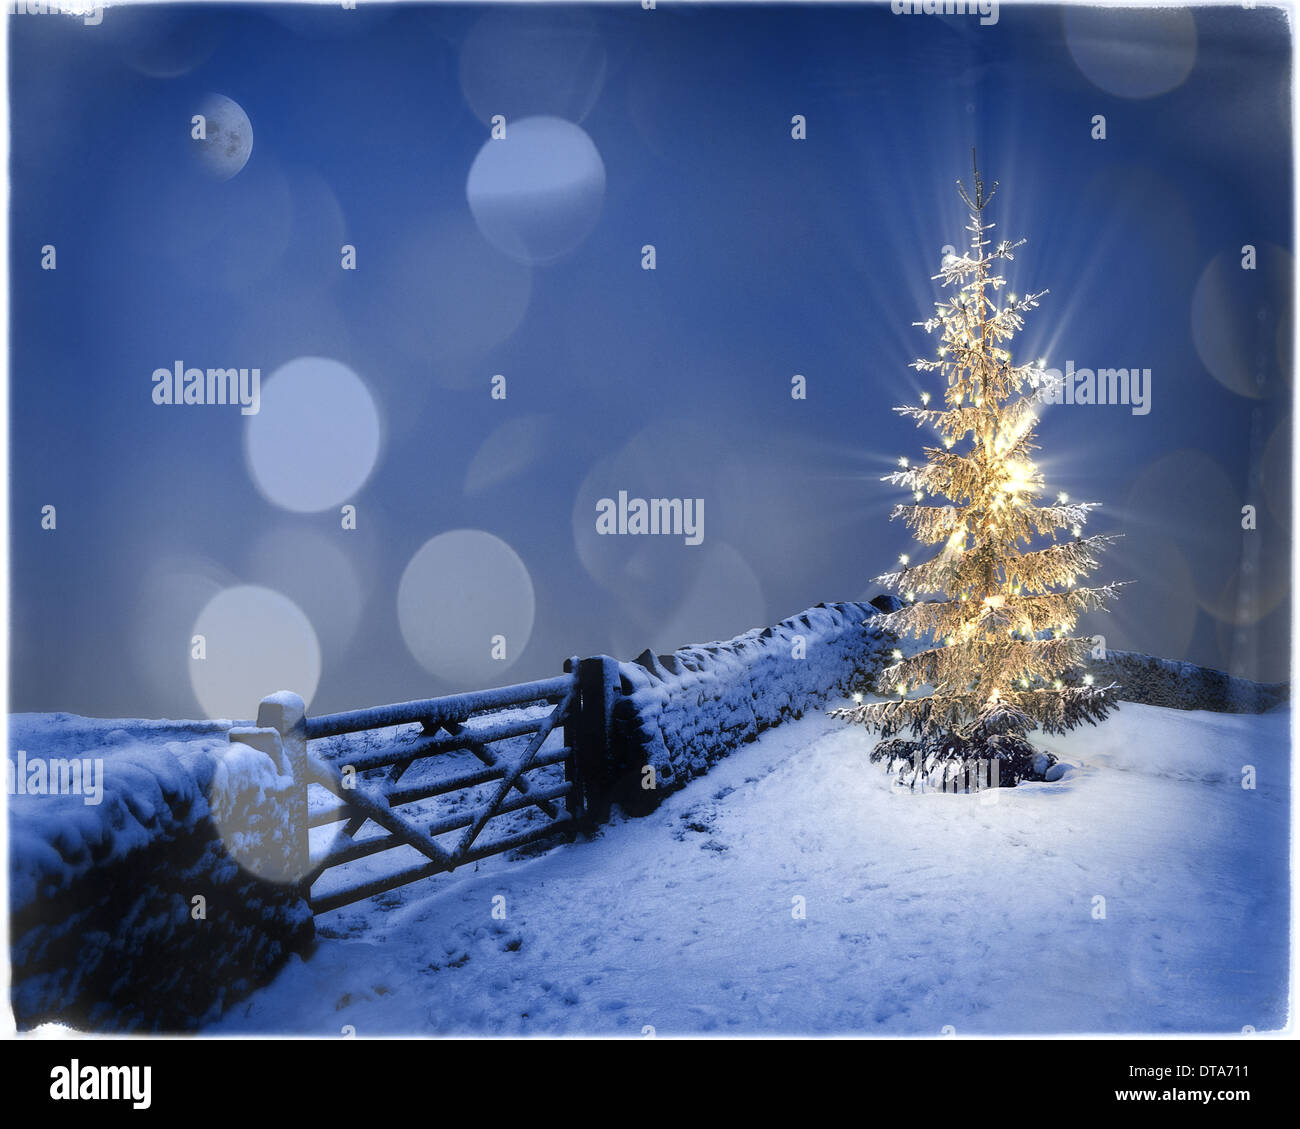 GB - GLOUCESTERSHIRE: Christmas in the Cotsworlds (Digital Art) Stock Photo